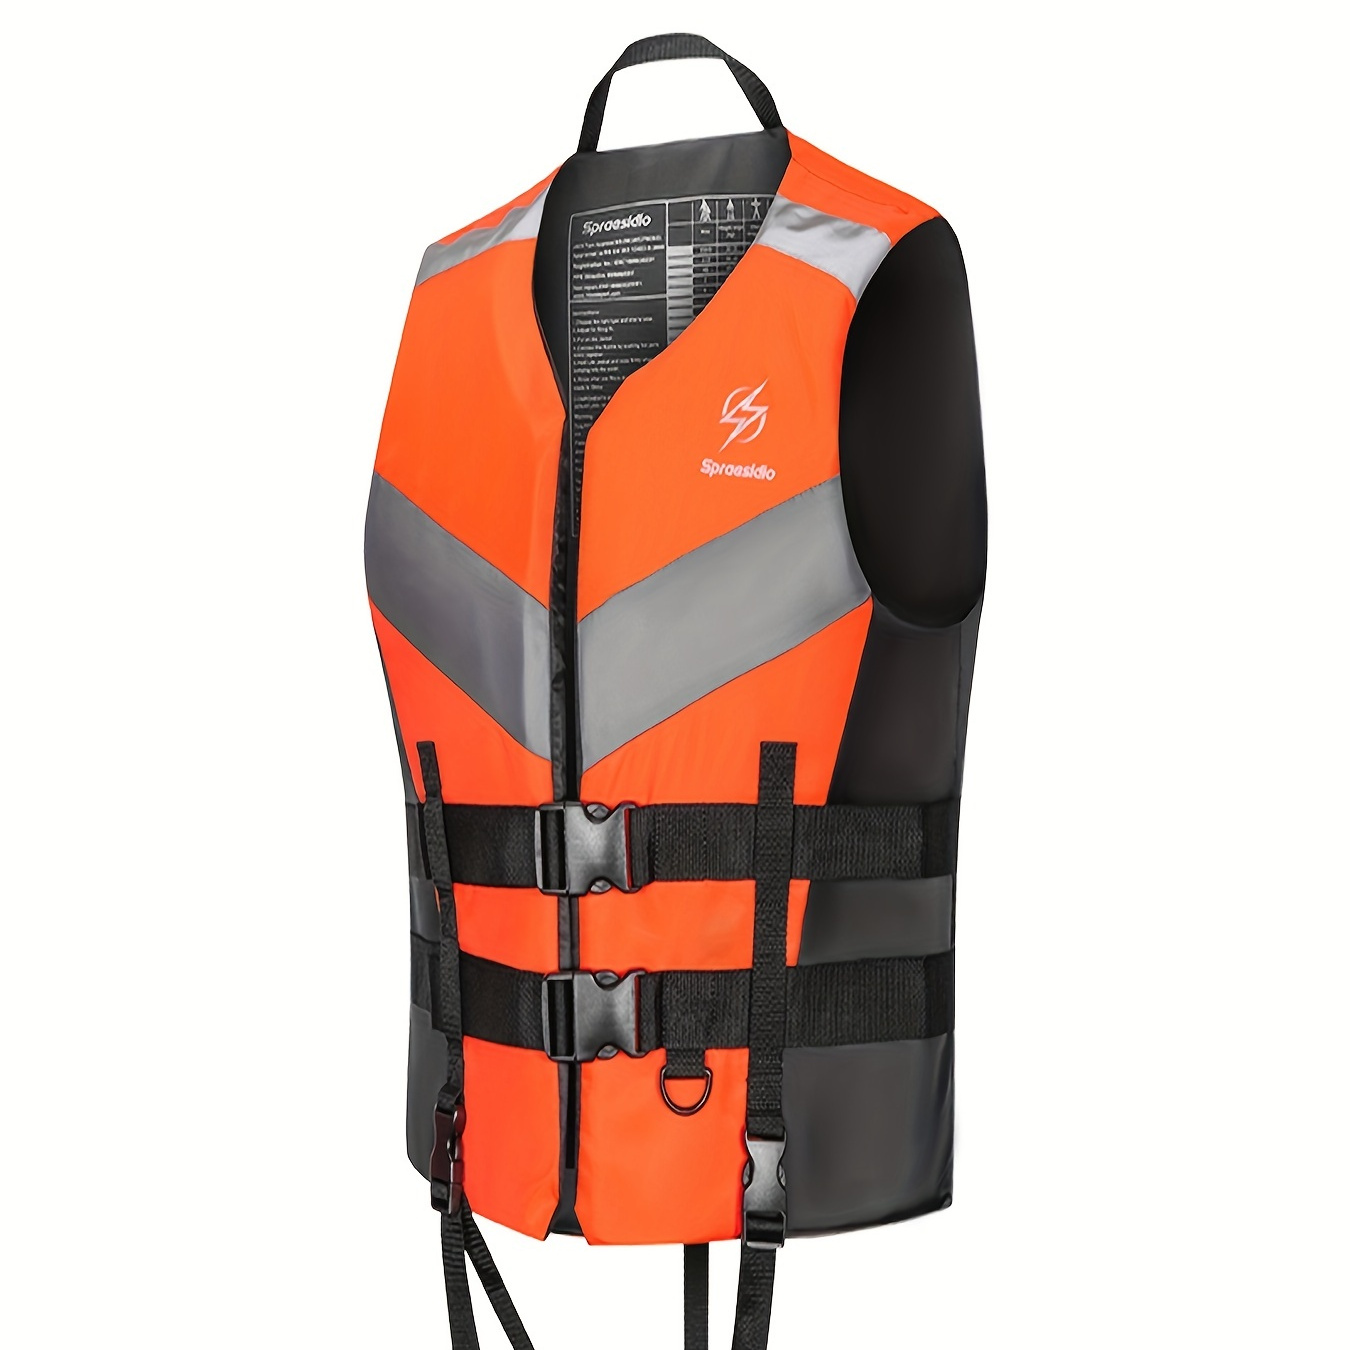 Outdoor Drifting Swimming Snorkeling Suit, Adjustable Safety Life